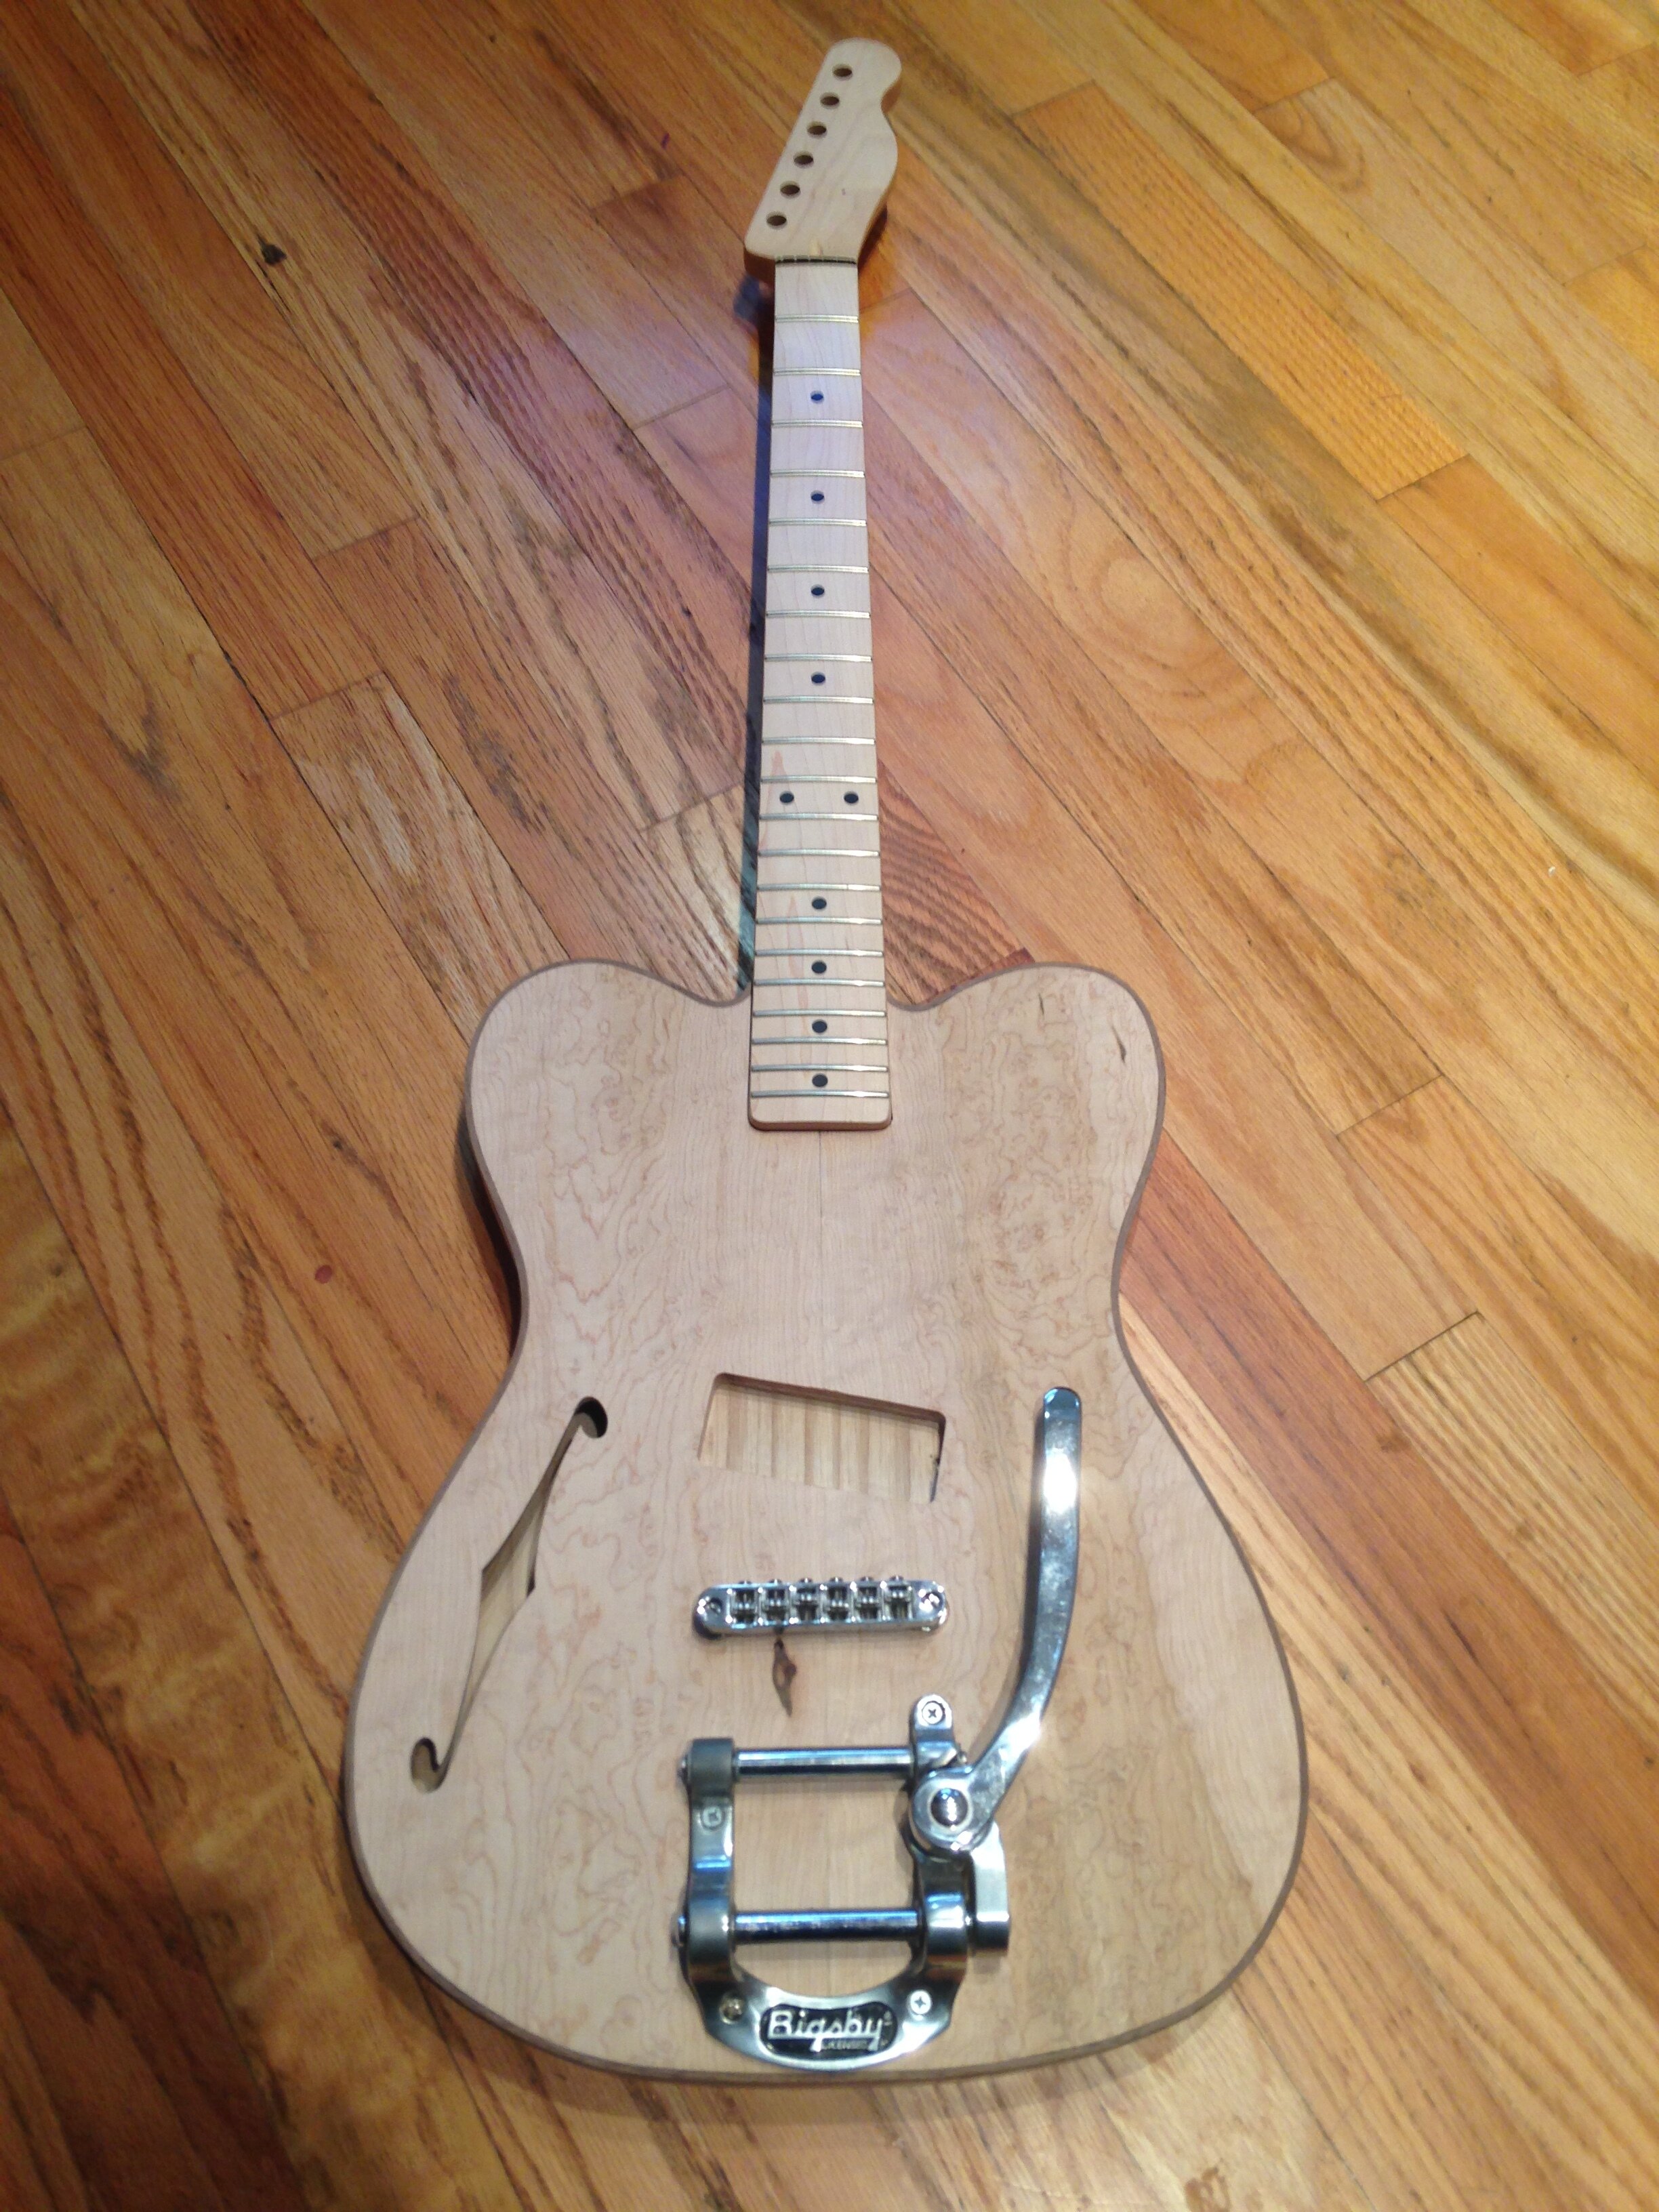 No-Cutaway Tele II  Maple top with some birdseye, ash back, maple neck. P-90 pickup and Bigsby trem bar.  Forest Tate Guitar Builder